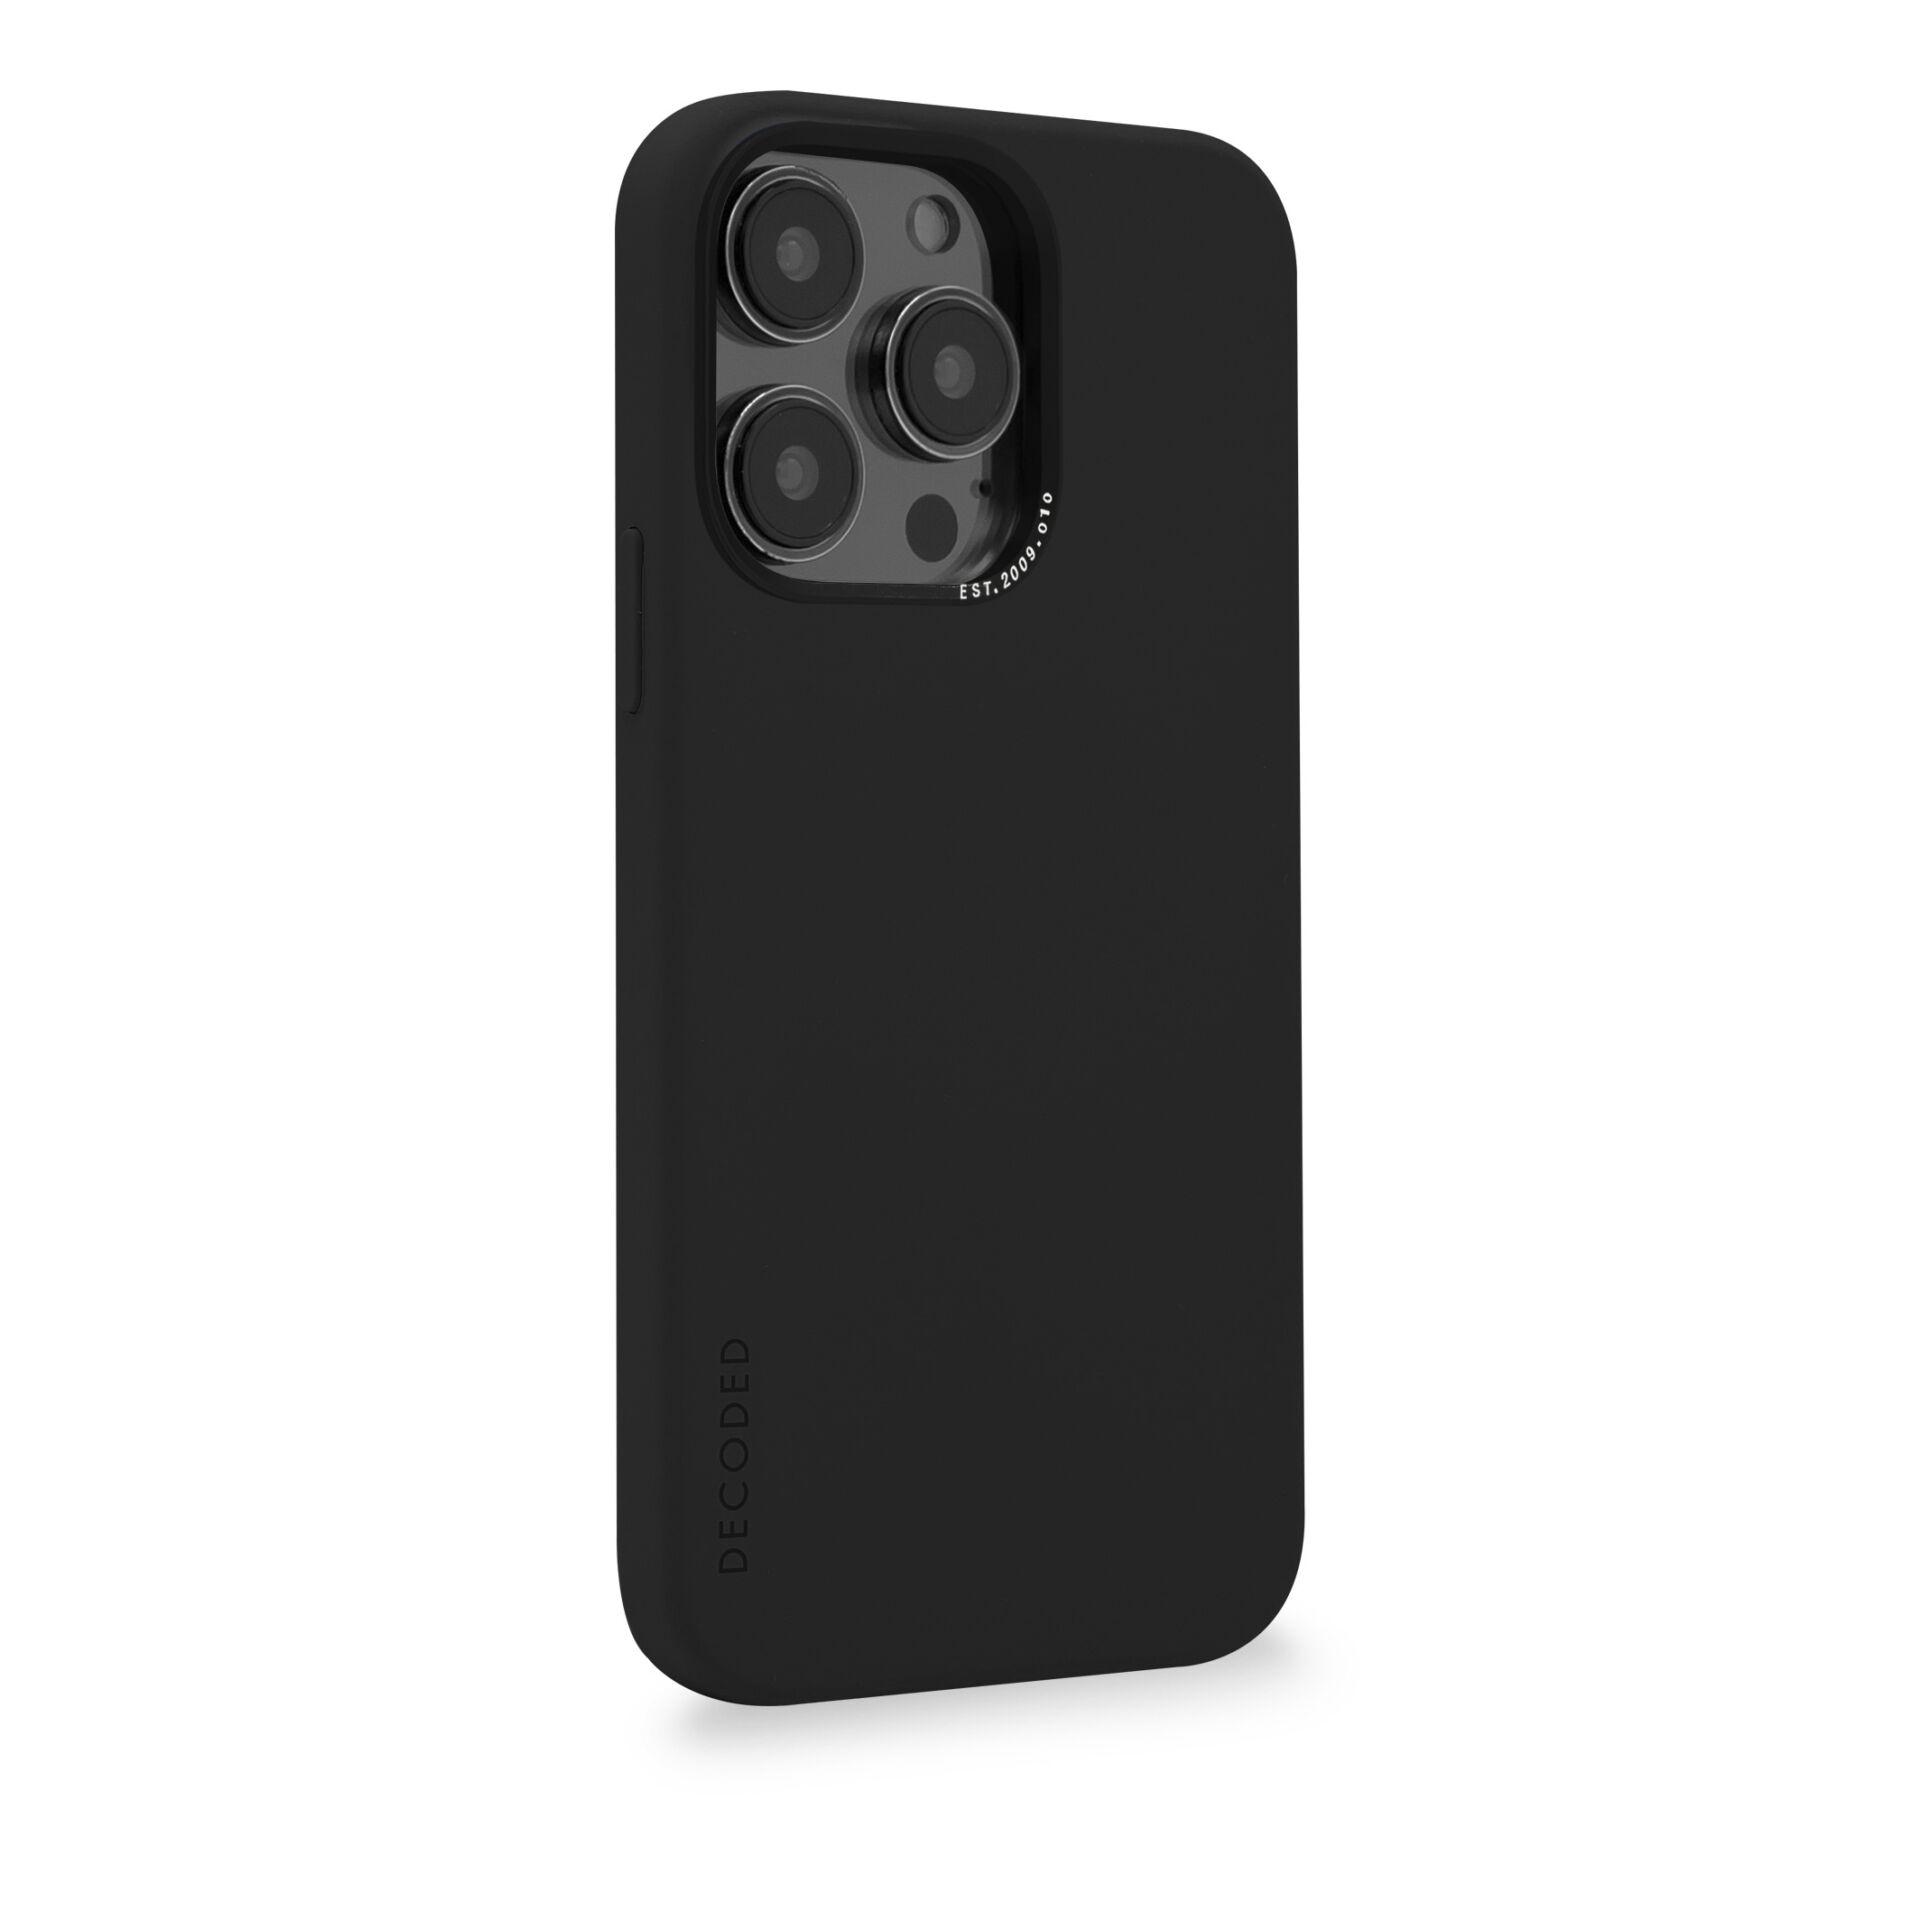 AntiMicrobial Charcoal, iPhone Max, Charcoal 14 Backcover Silicone Backcover, DECODED Apple, Pro